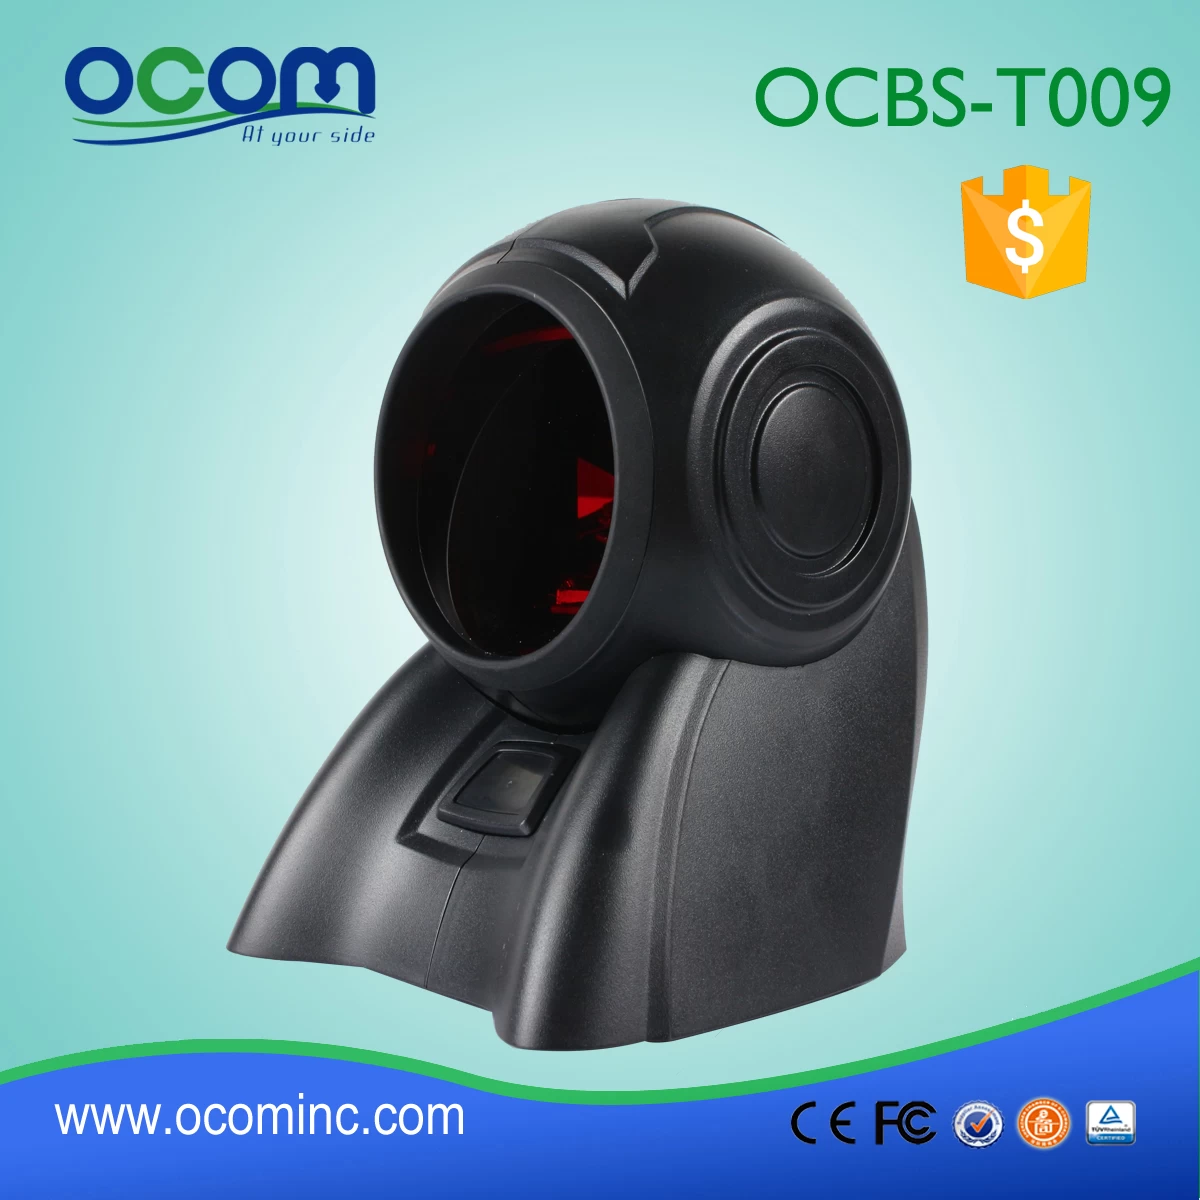 android Omni barcode laser scanner inventory, table top omni barcode scanner